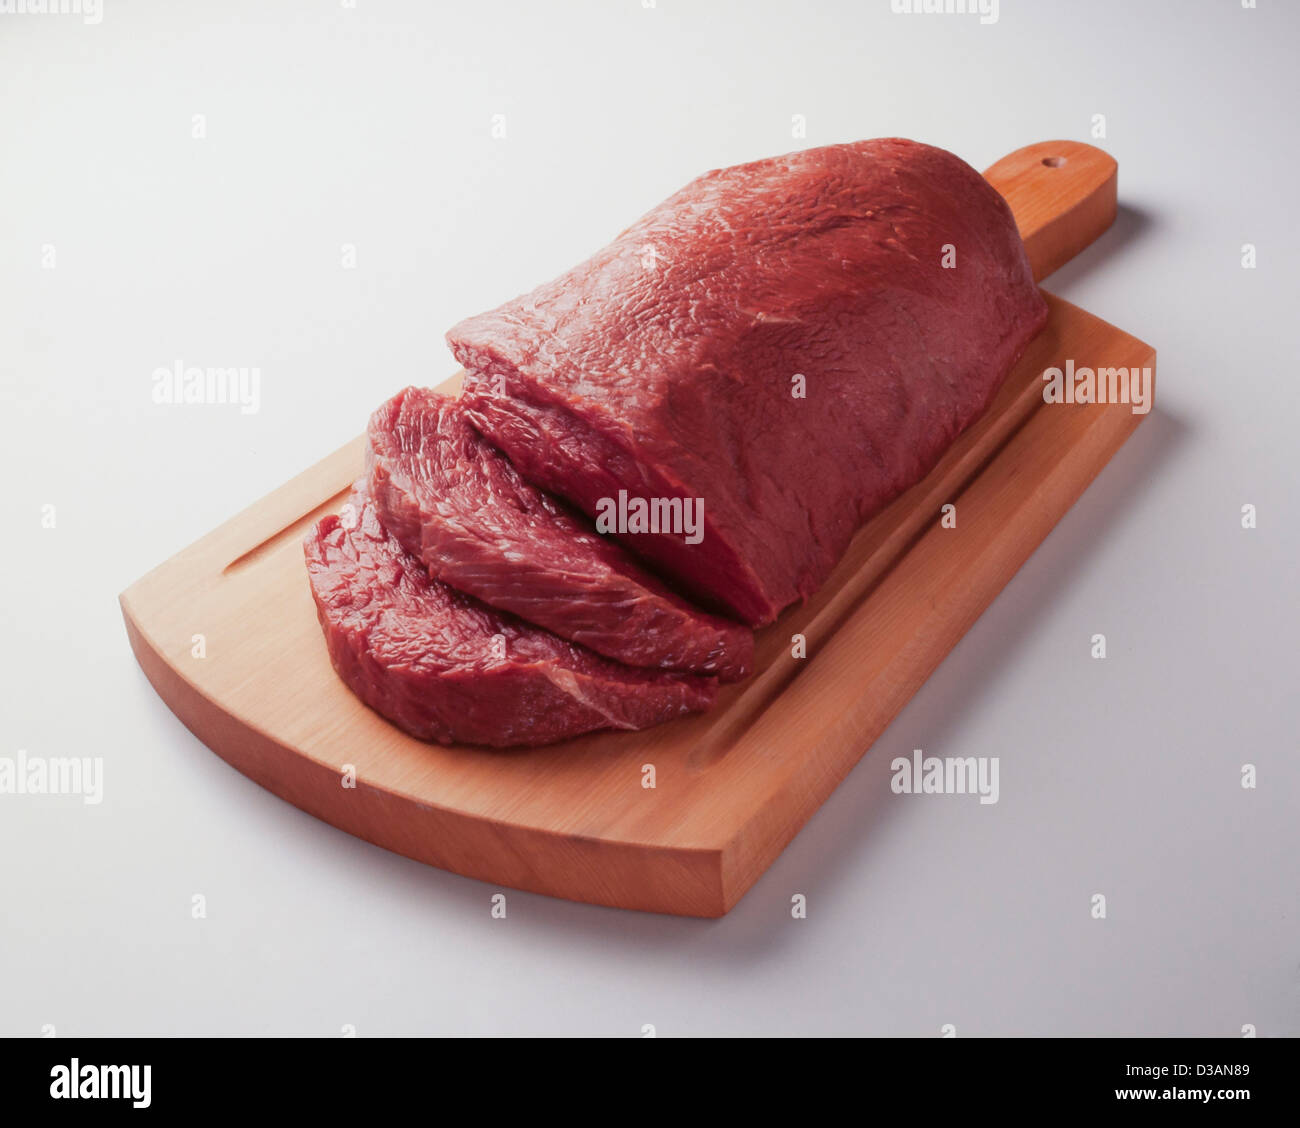 fresh and lean raw meat cut into portions on wooden board Stock Photo